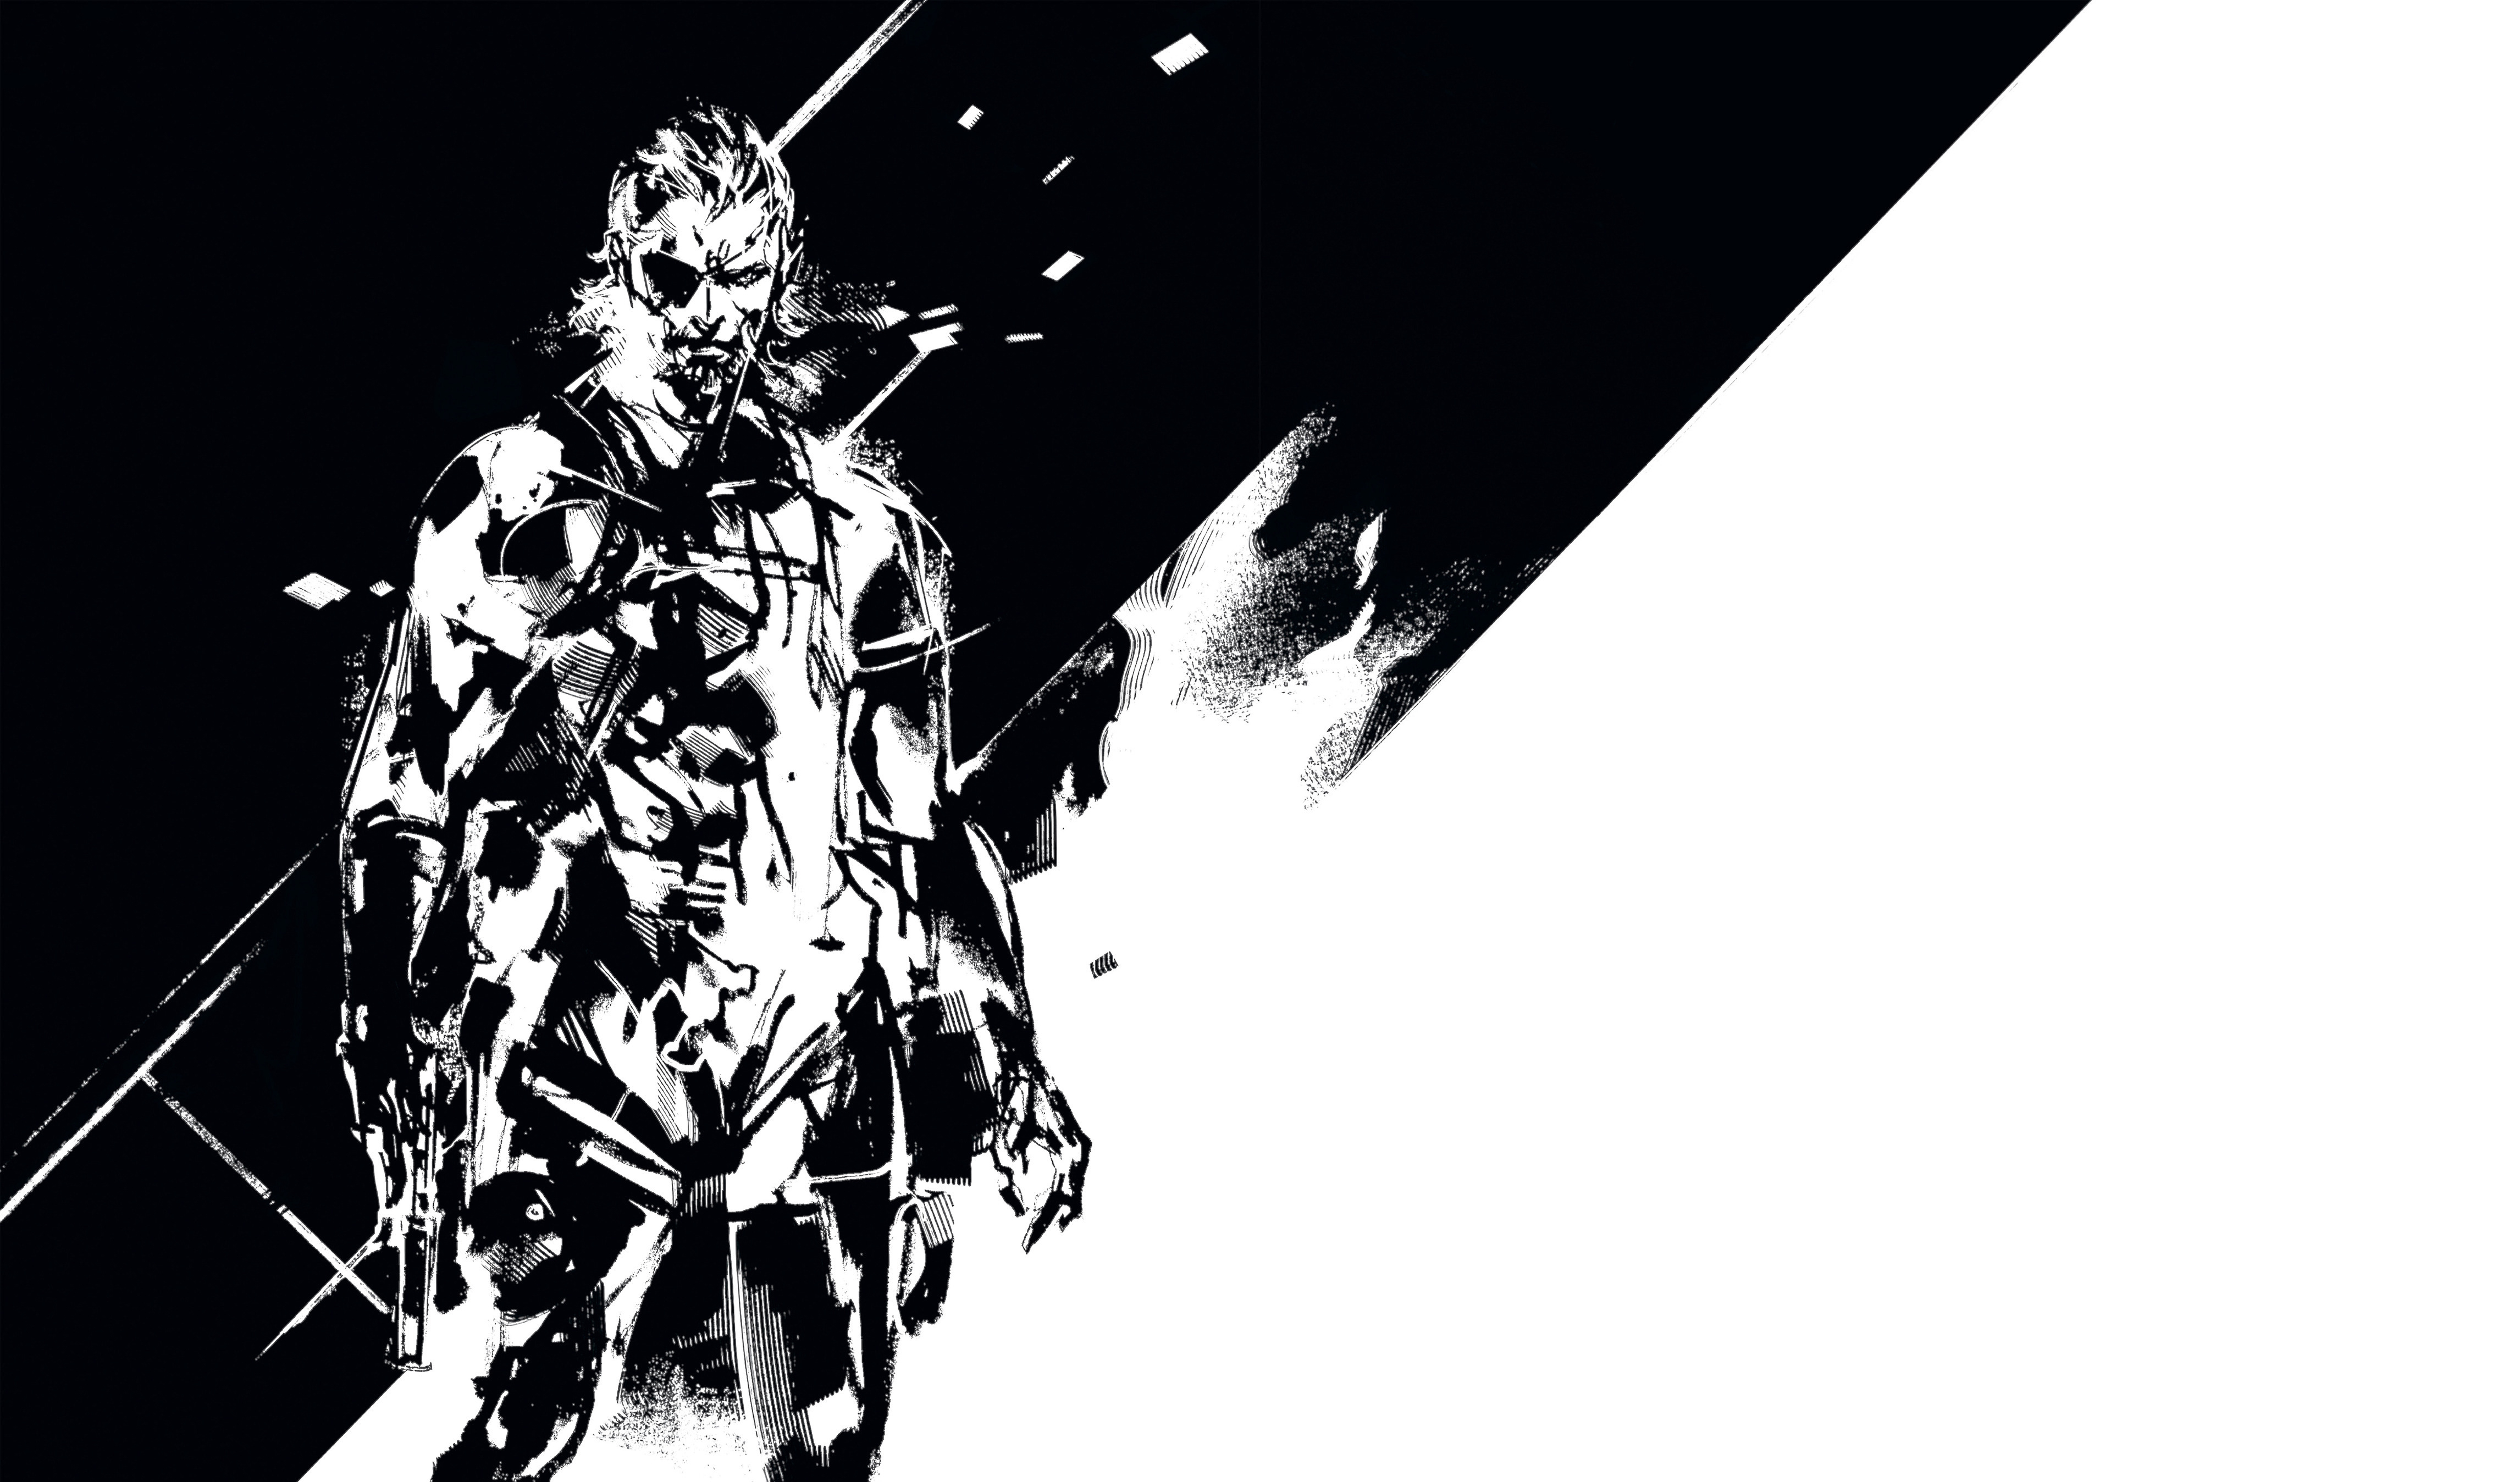 Video Game Metal Gear Solid V: The Phantom Pain HD Wallpaper | Background Image